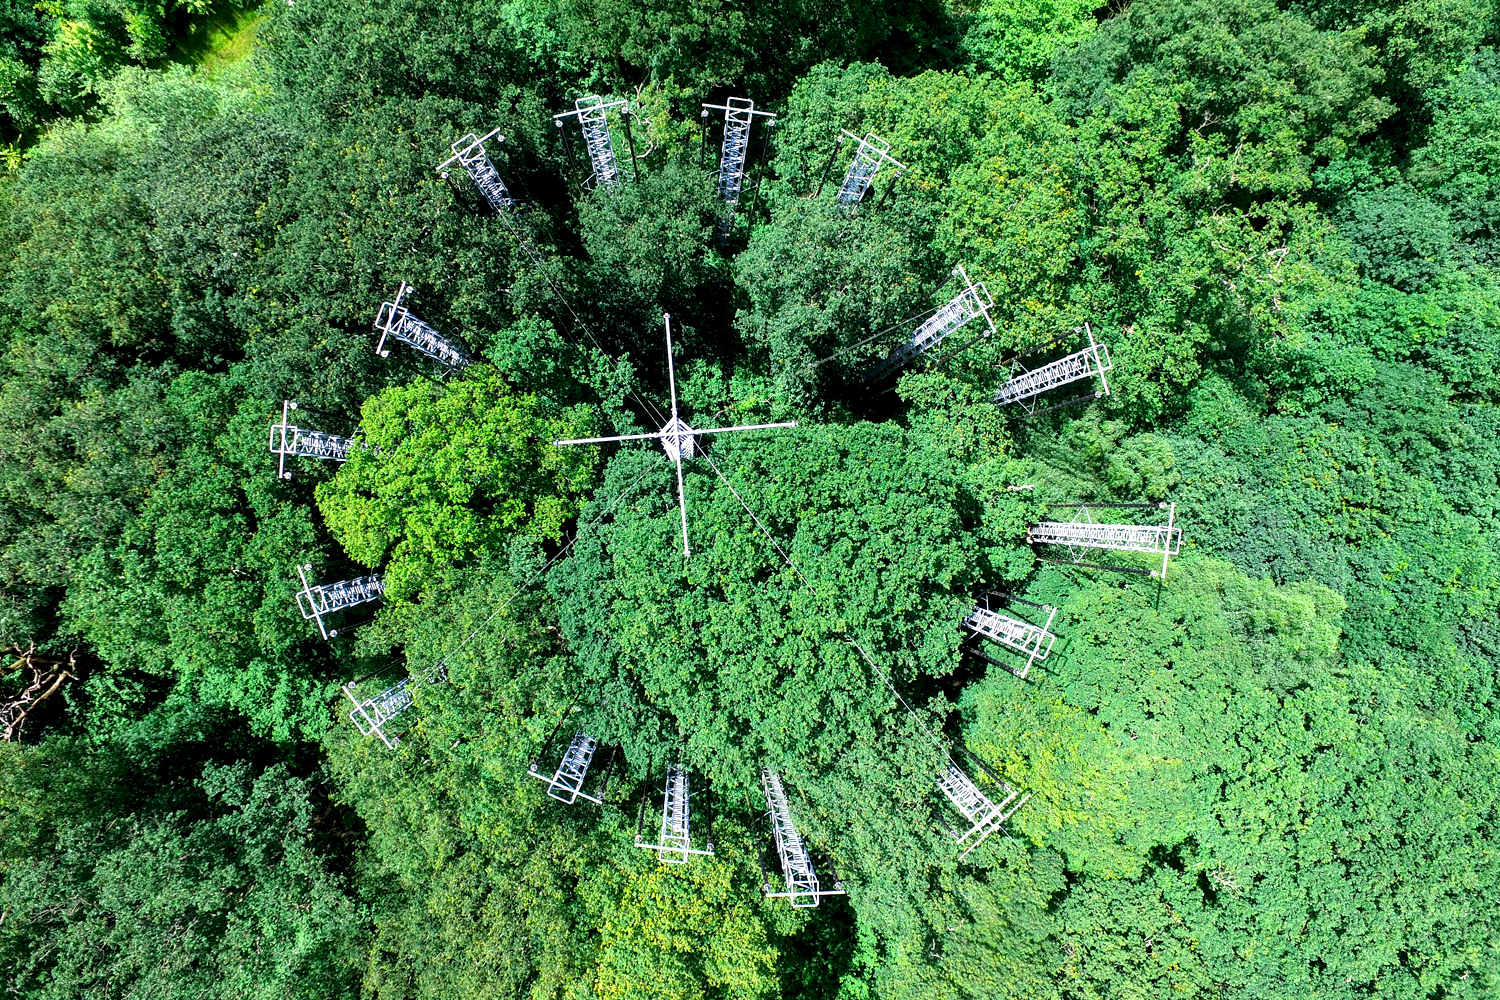 Aerial view of the BIFoR FACE facility rising up through a monochromatic green forest canopy